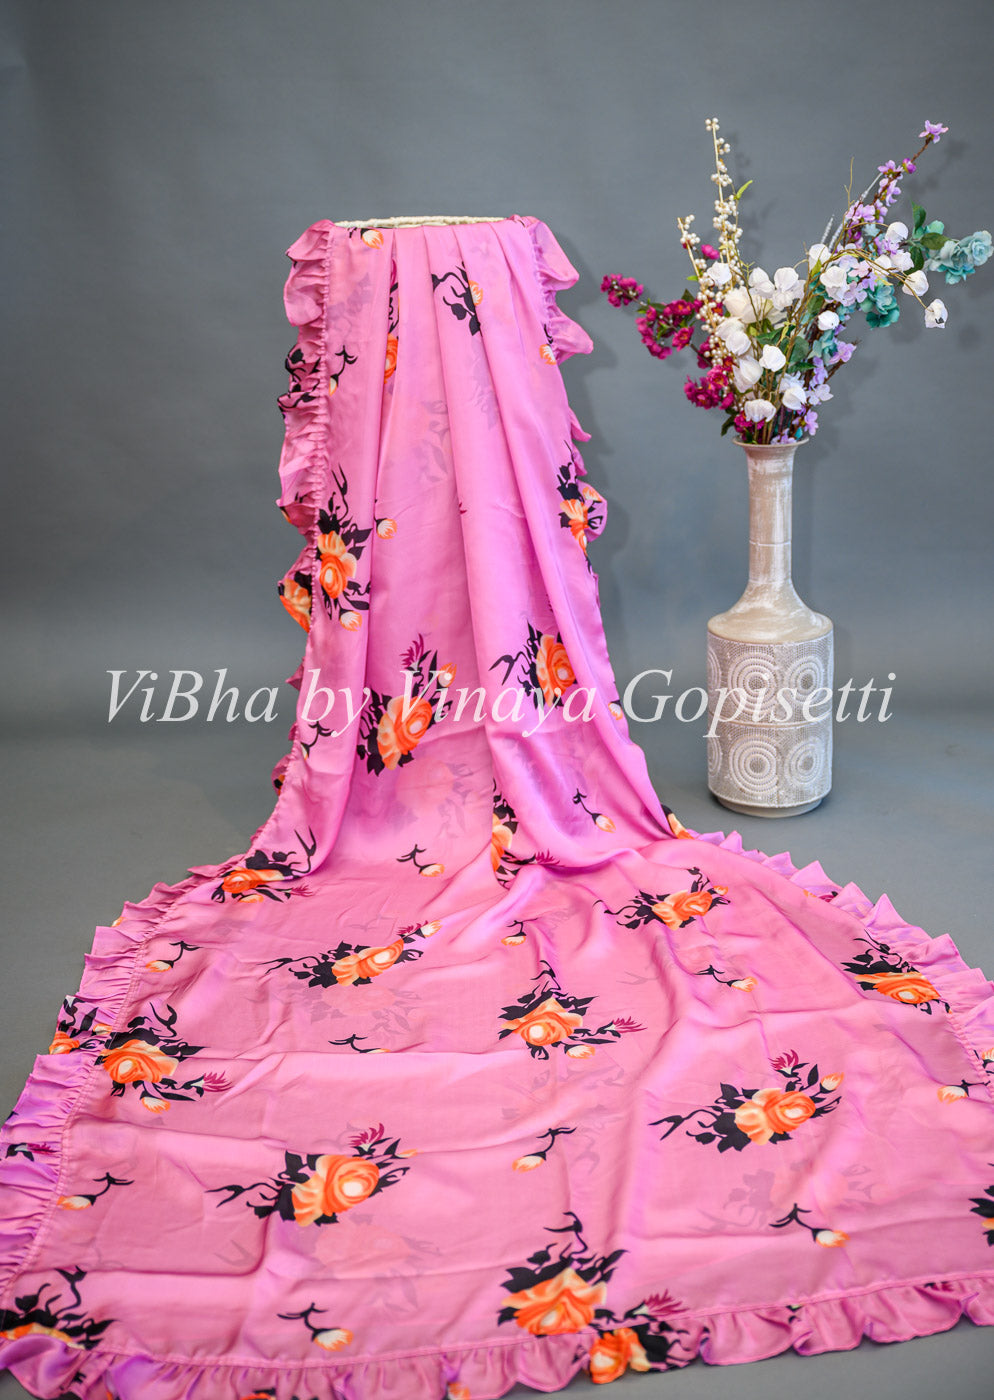 Light Purple Floral Saree With Ruffle Borders And Contrast White Blouse